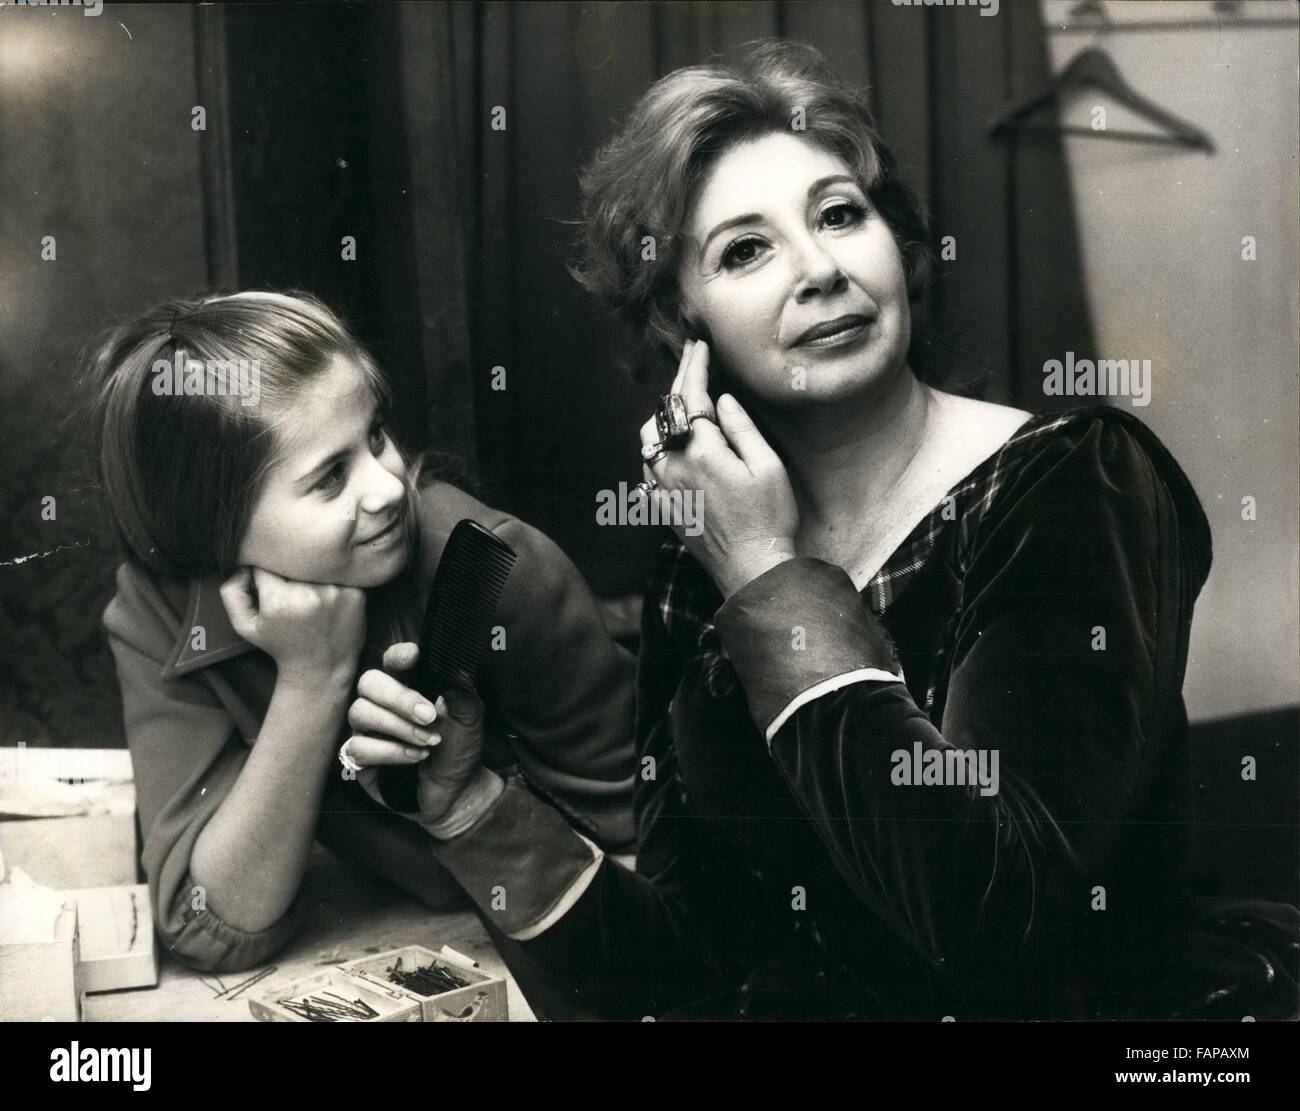 1962 - 11-year-old Muffy who is deaf arrives here for her opera Mother's British Debut at Covent Garden.: Beverly Silis, the idol of America's opera public, makes her british debut at the Royal Opera House, Covent Garden, on Wednesday December 23rd. Her 11-year-old daughter, Muffy has come here for the occasion Muffy adores opera yet the sad thing is that she has never heard her mother sing a note, for she is deaf Beverly is now rated on both sides of the Atlantic something special mong operation spra Photo shows 11-yearold Muffy watches her mother Beverly Sills making up in her dressing ro Stock Photo